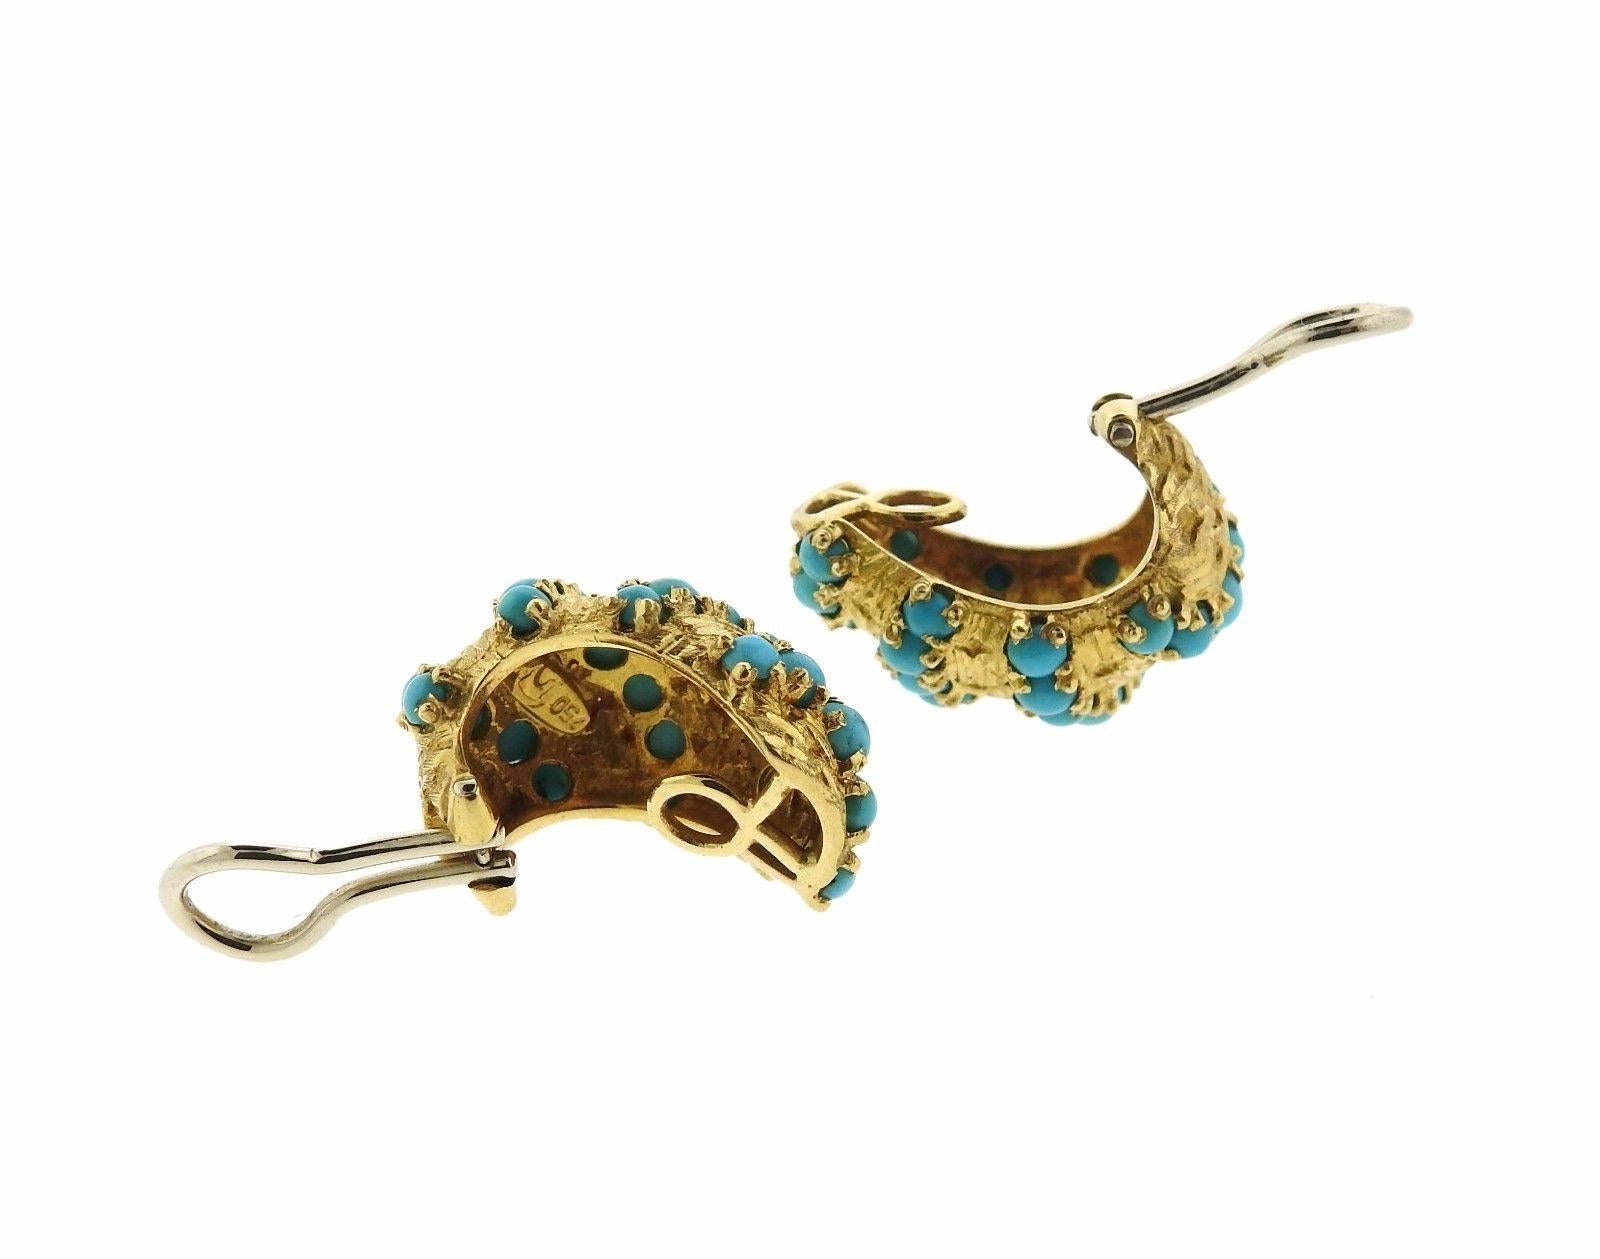 A pair of 18k gold earrings set with turquoise.  The earrings are 24mm x 17mm and weigh 17.8 grams.  Marked: 469MI, 750.